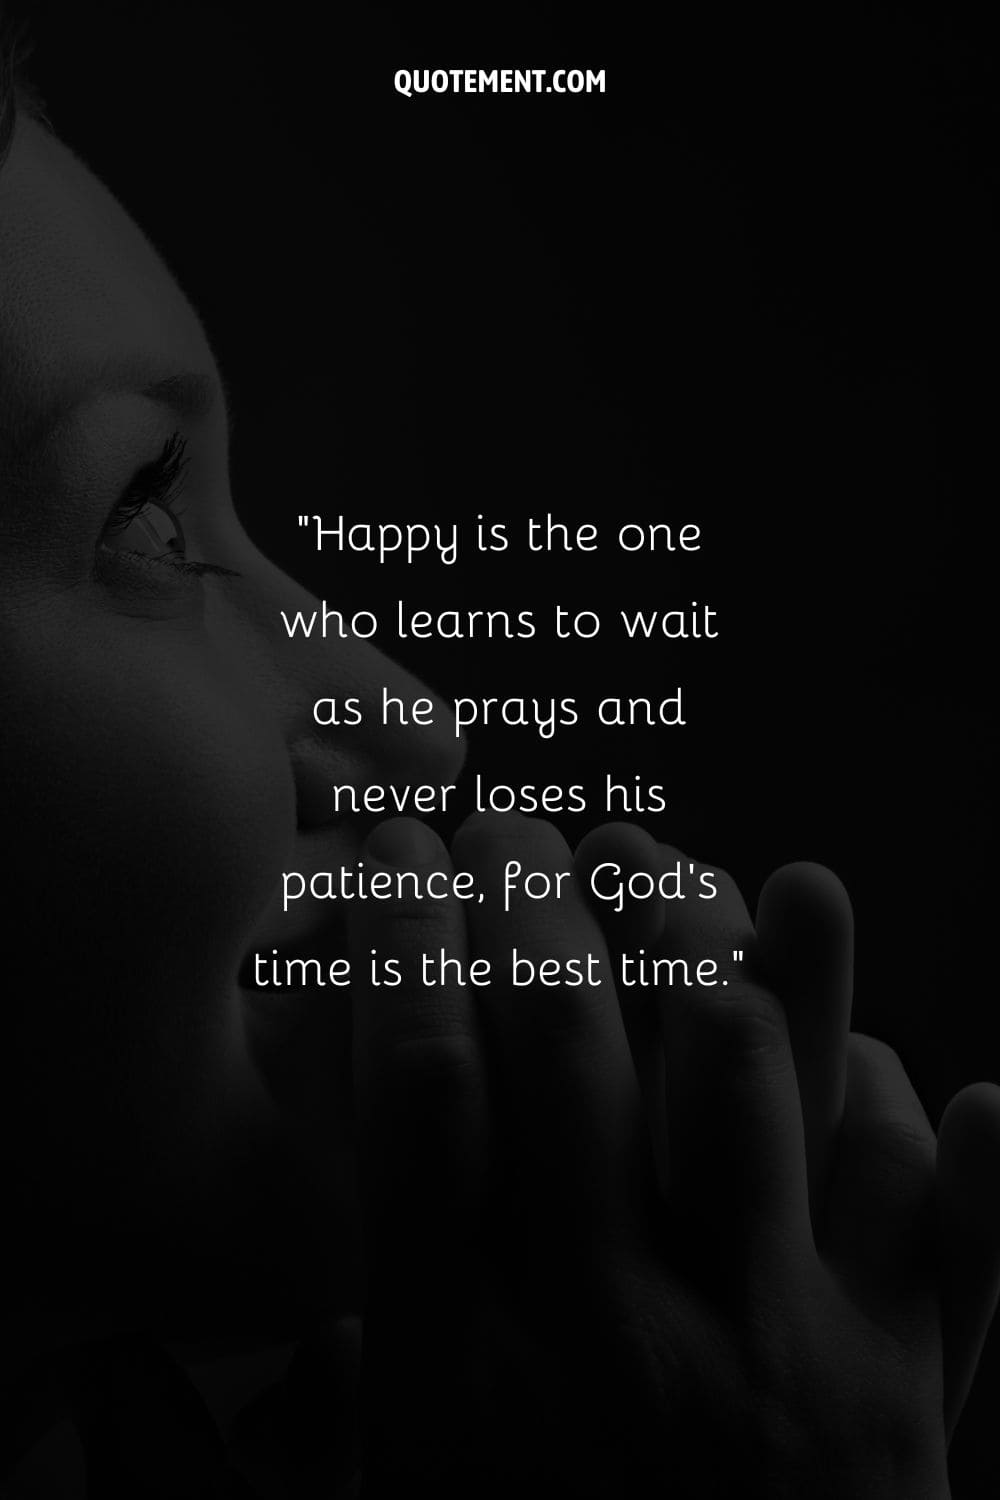 Image of a person peacefully praying representing God's timing is perfect quote.